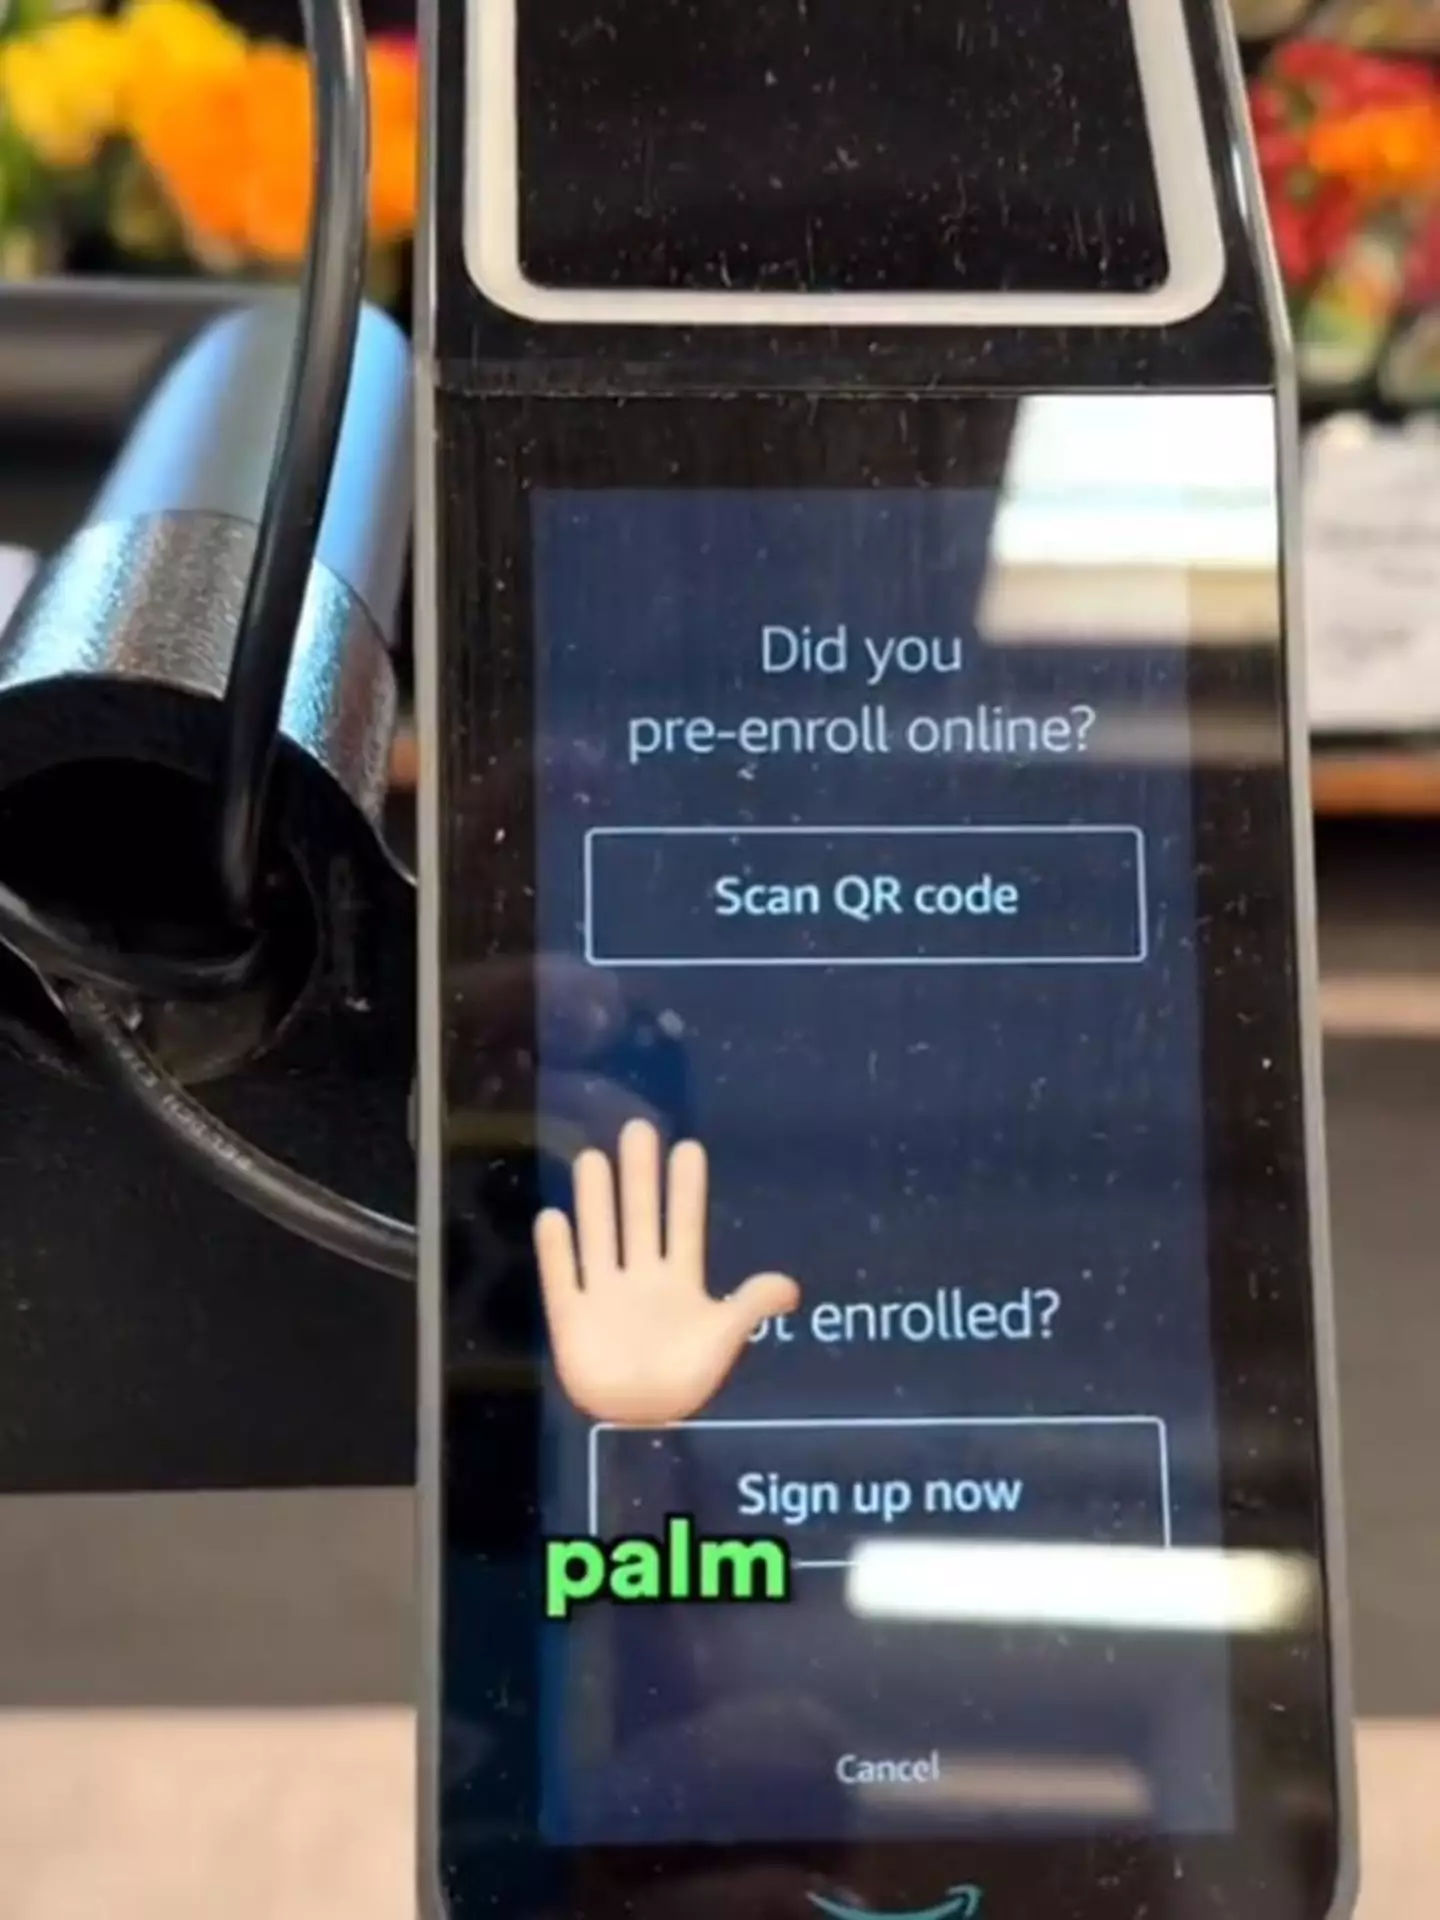 The technology uses unique features of the palm of your hand to establish your identity.